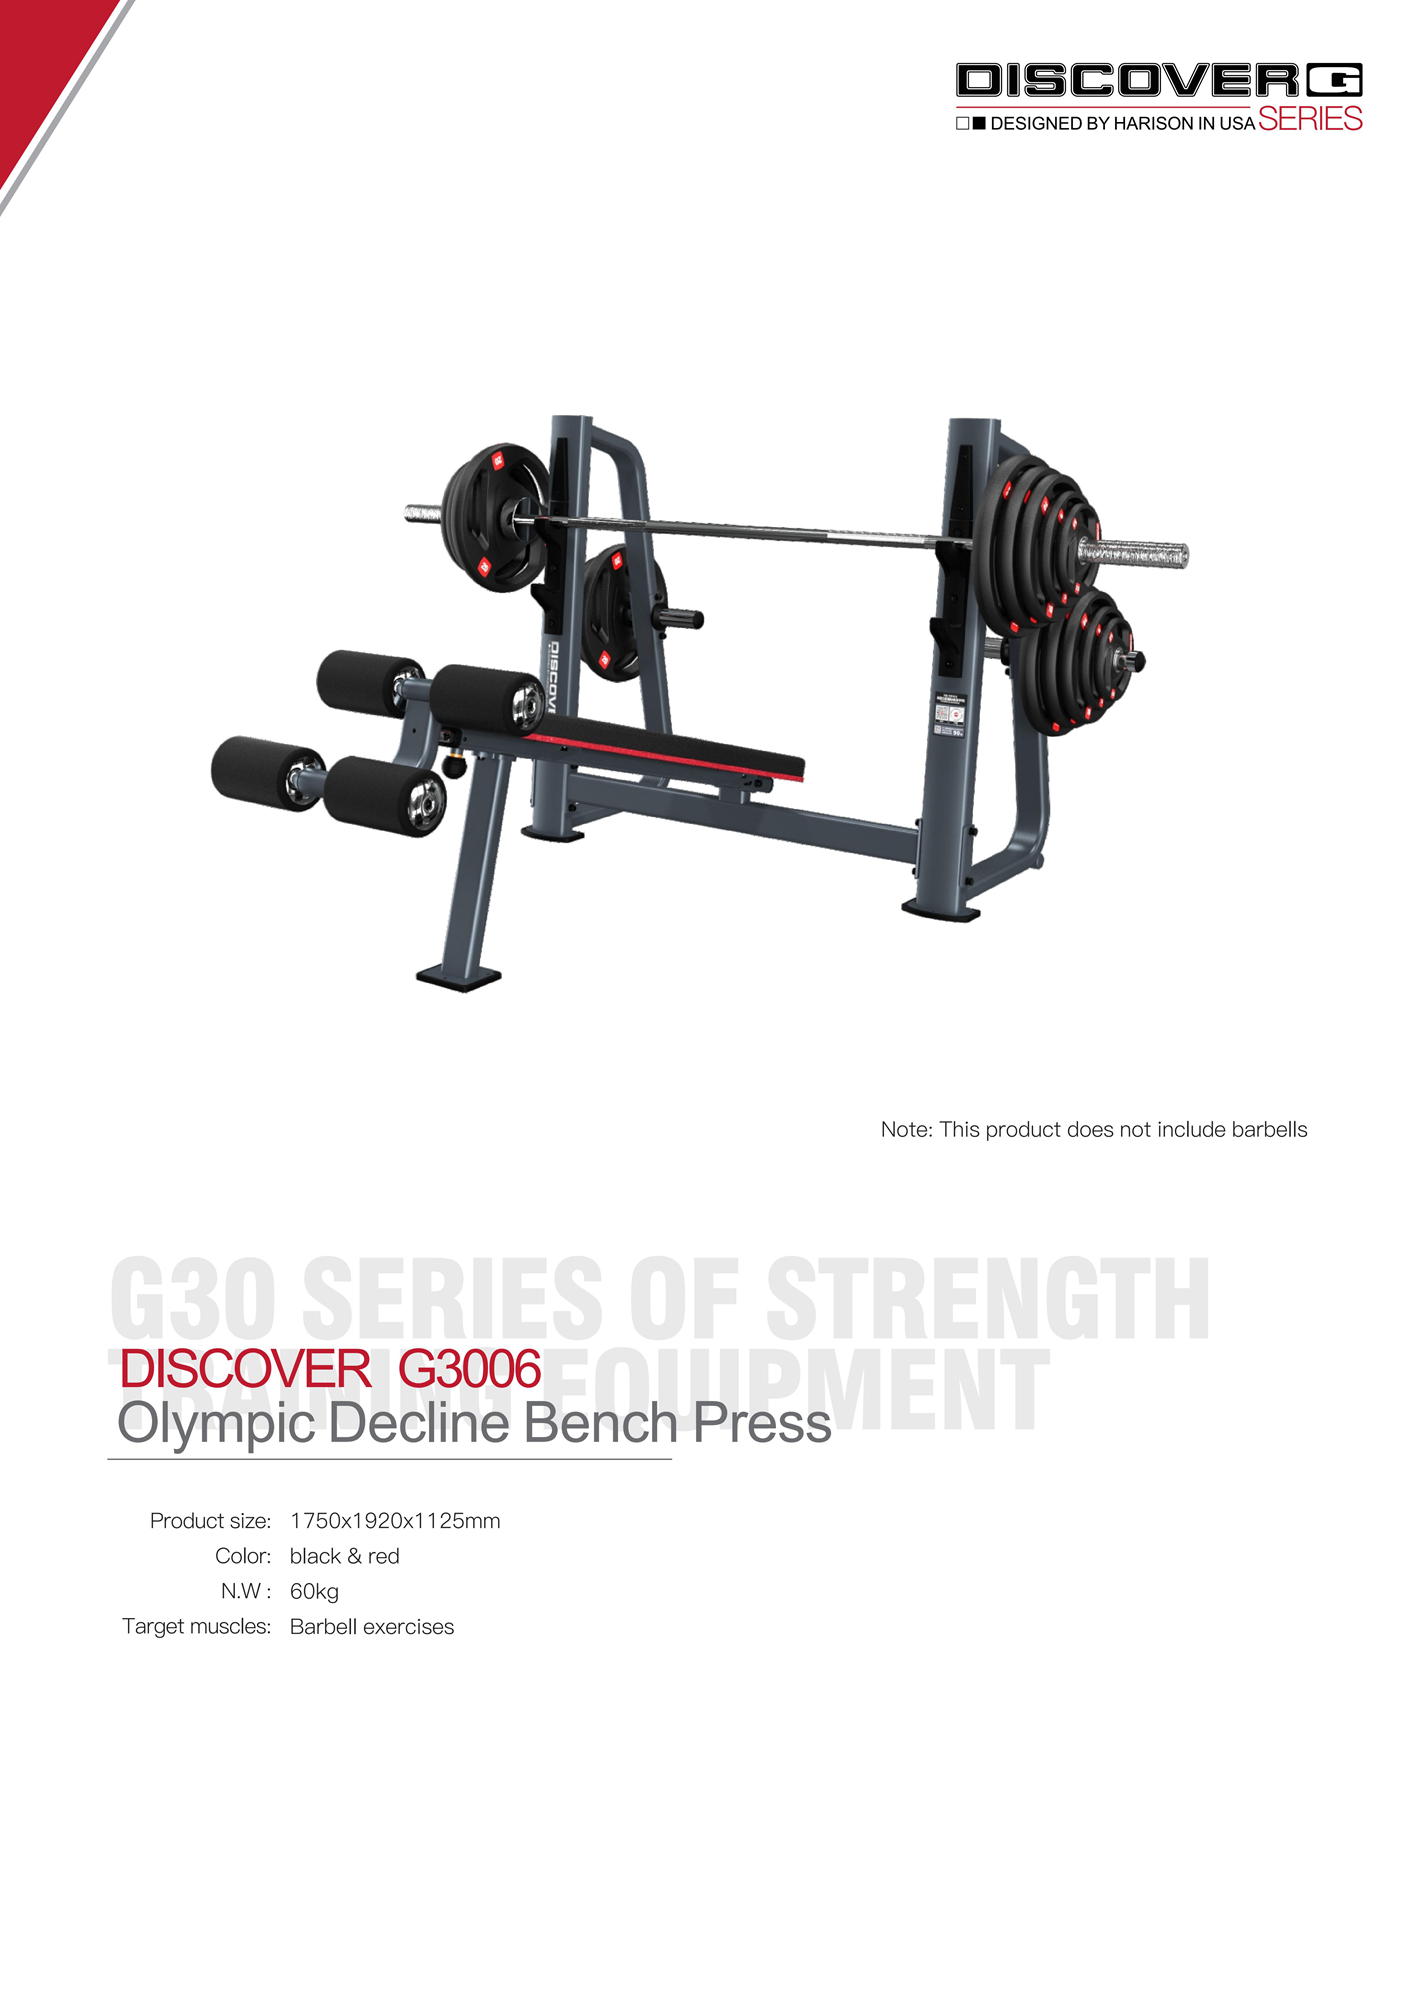 DISCOVER G3006 Olympic Decline Bench Press